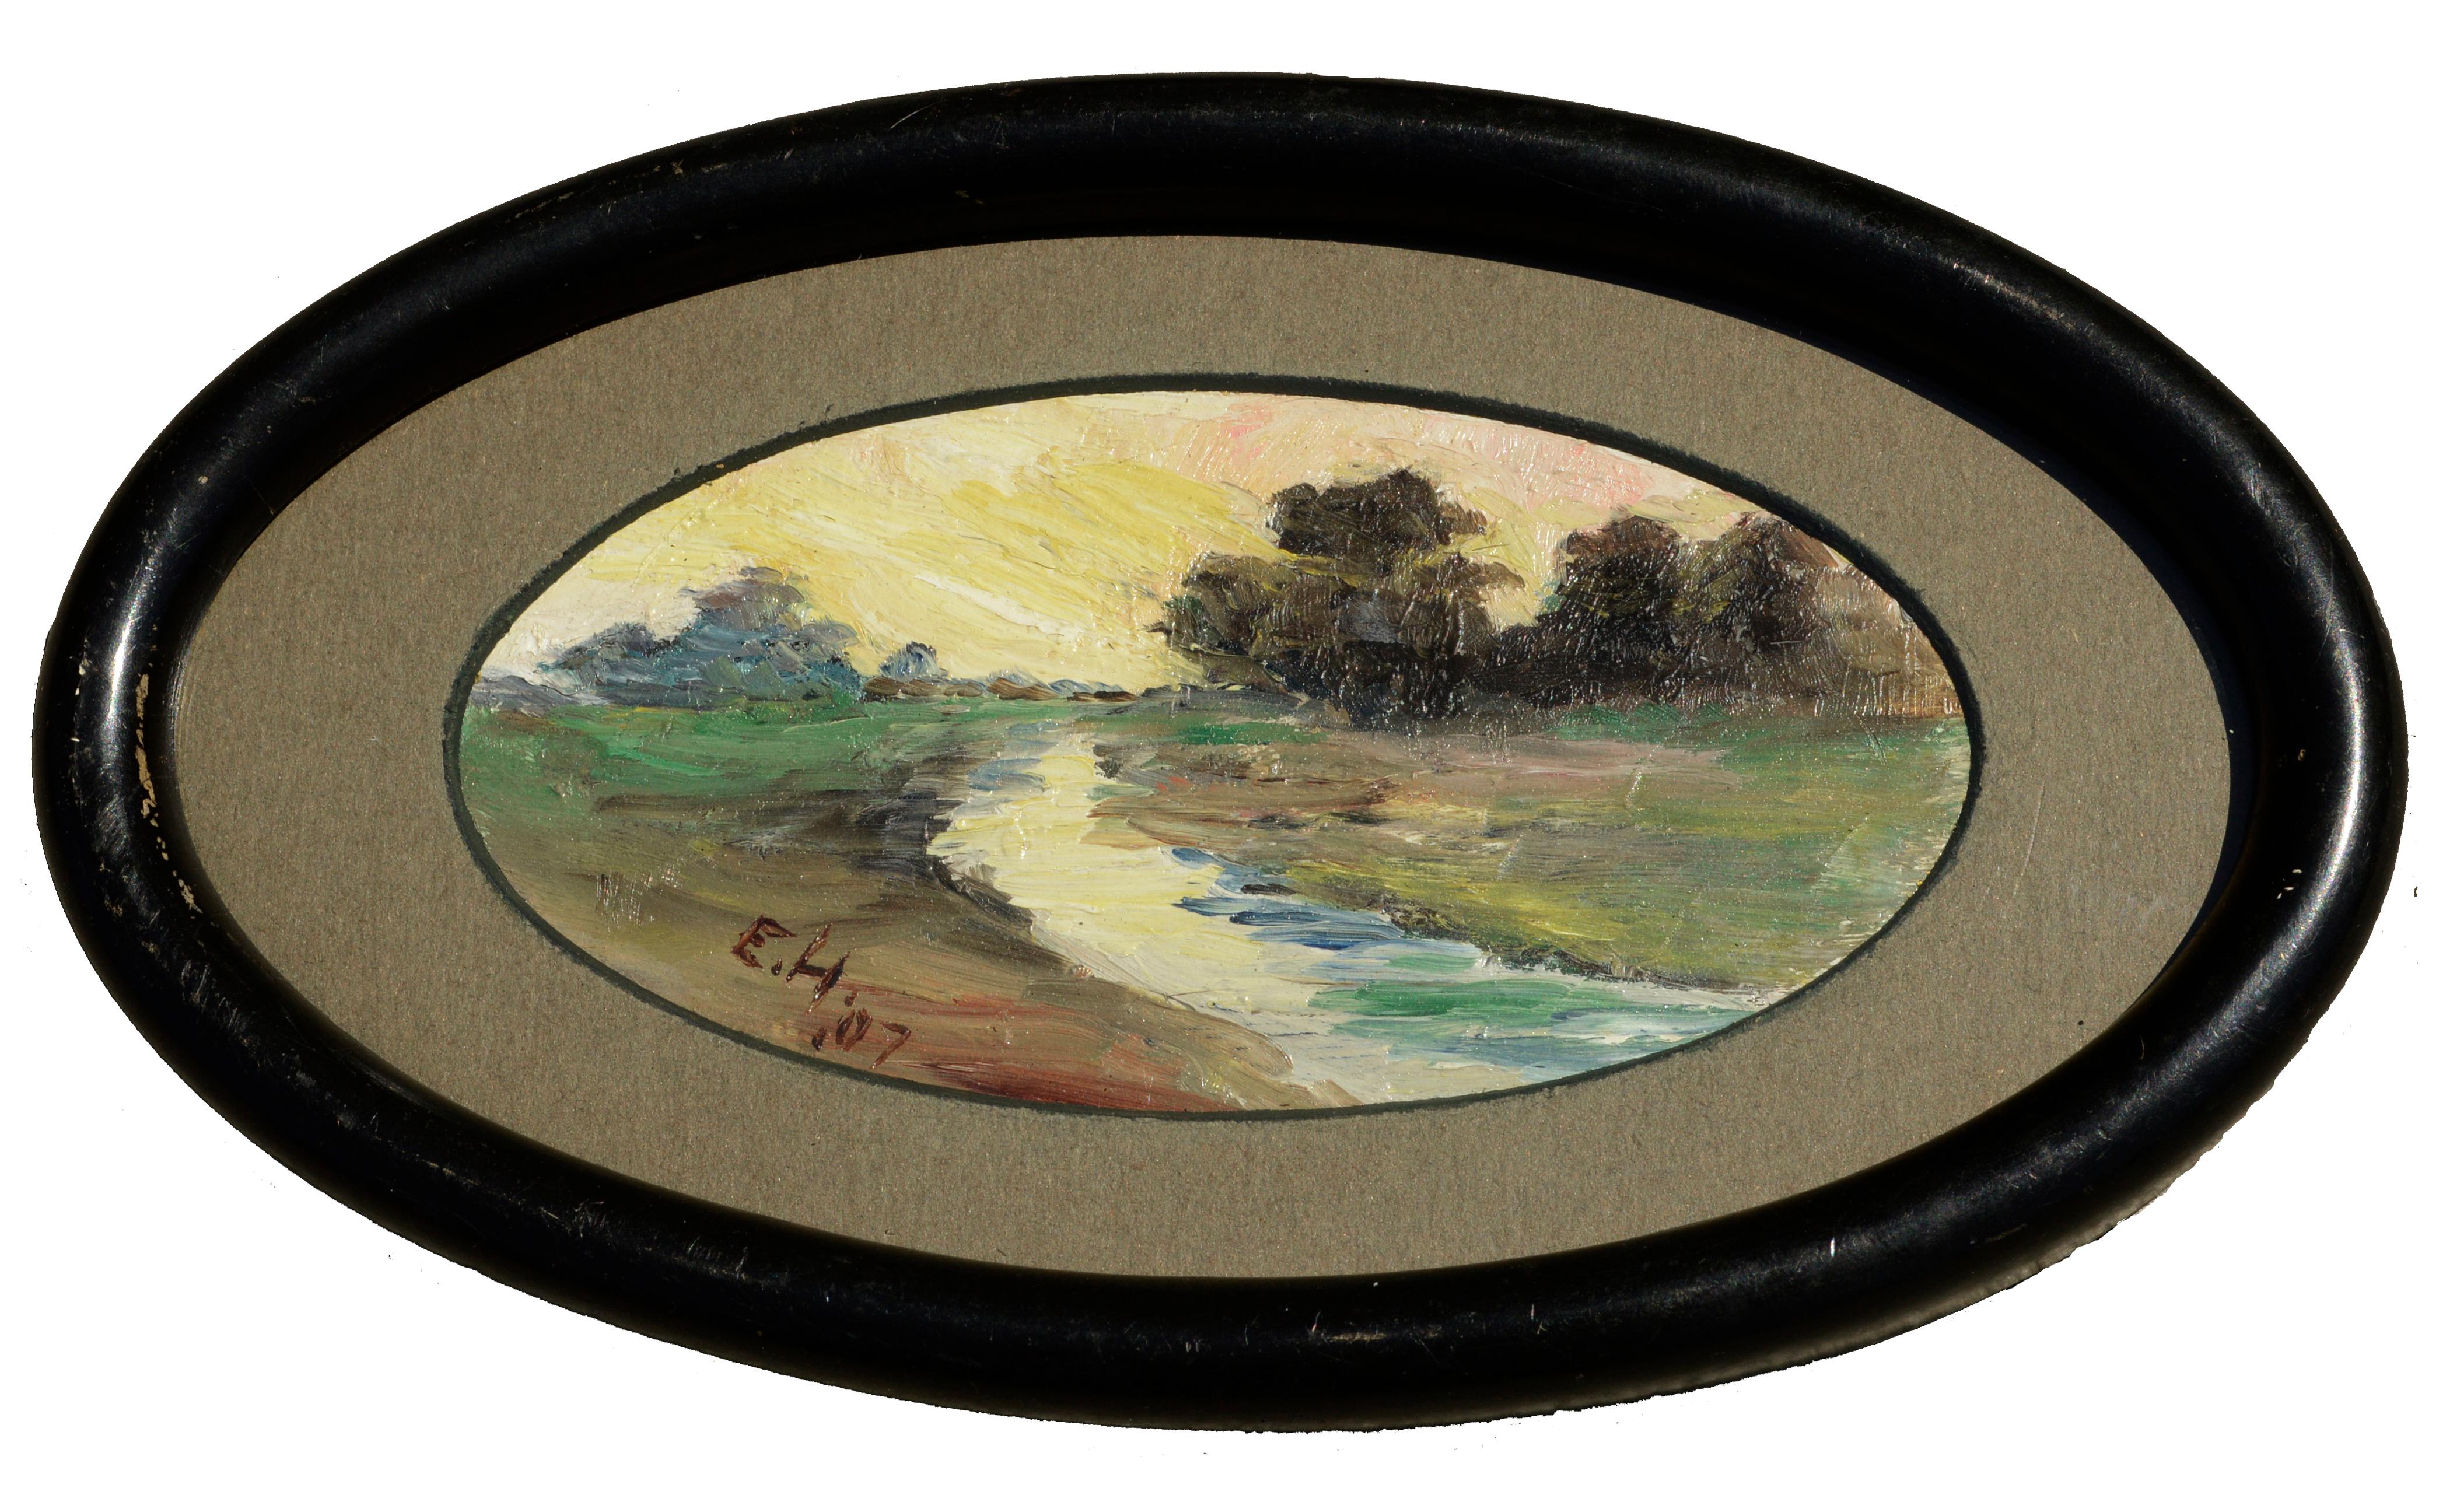 Unknown Landscape Painting - Early 20th Century Miniature Oval Landscape, San Rafael Valley Stream